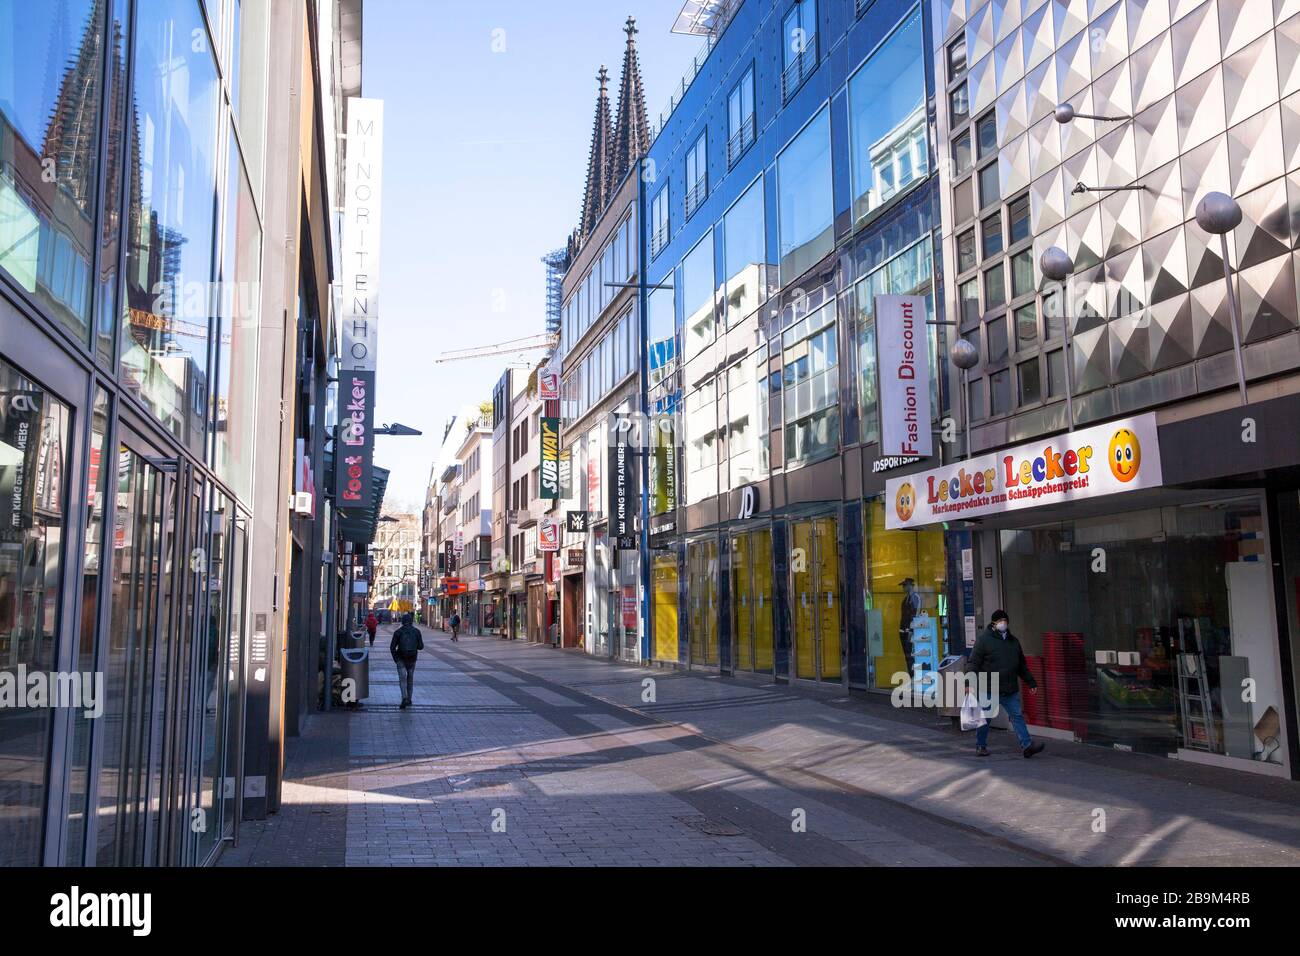 Coronavirus / Covid 19 outbreak, March 24th. 2020. Only few people on  shopping street Hohe Strasse, usually visited by thousands of people,  Cologne, G Stock Photo - Alamy